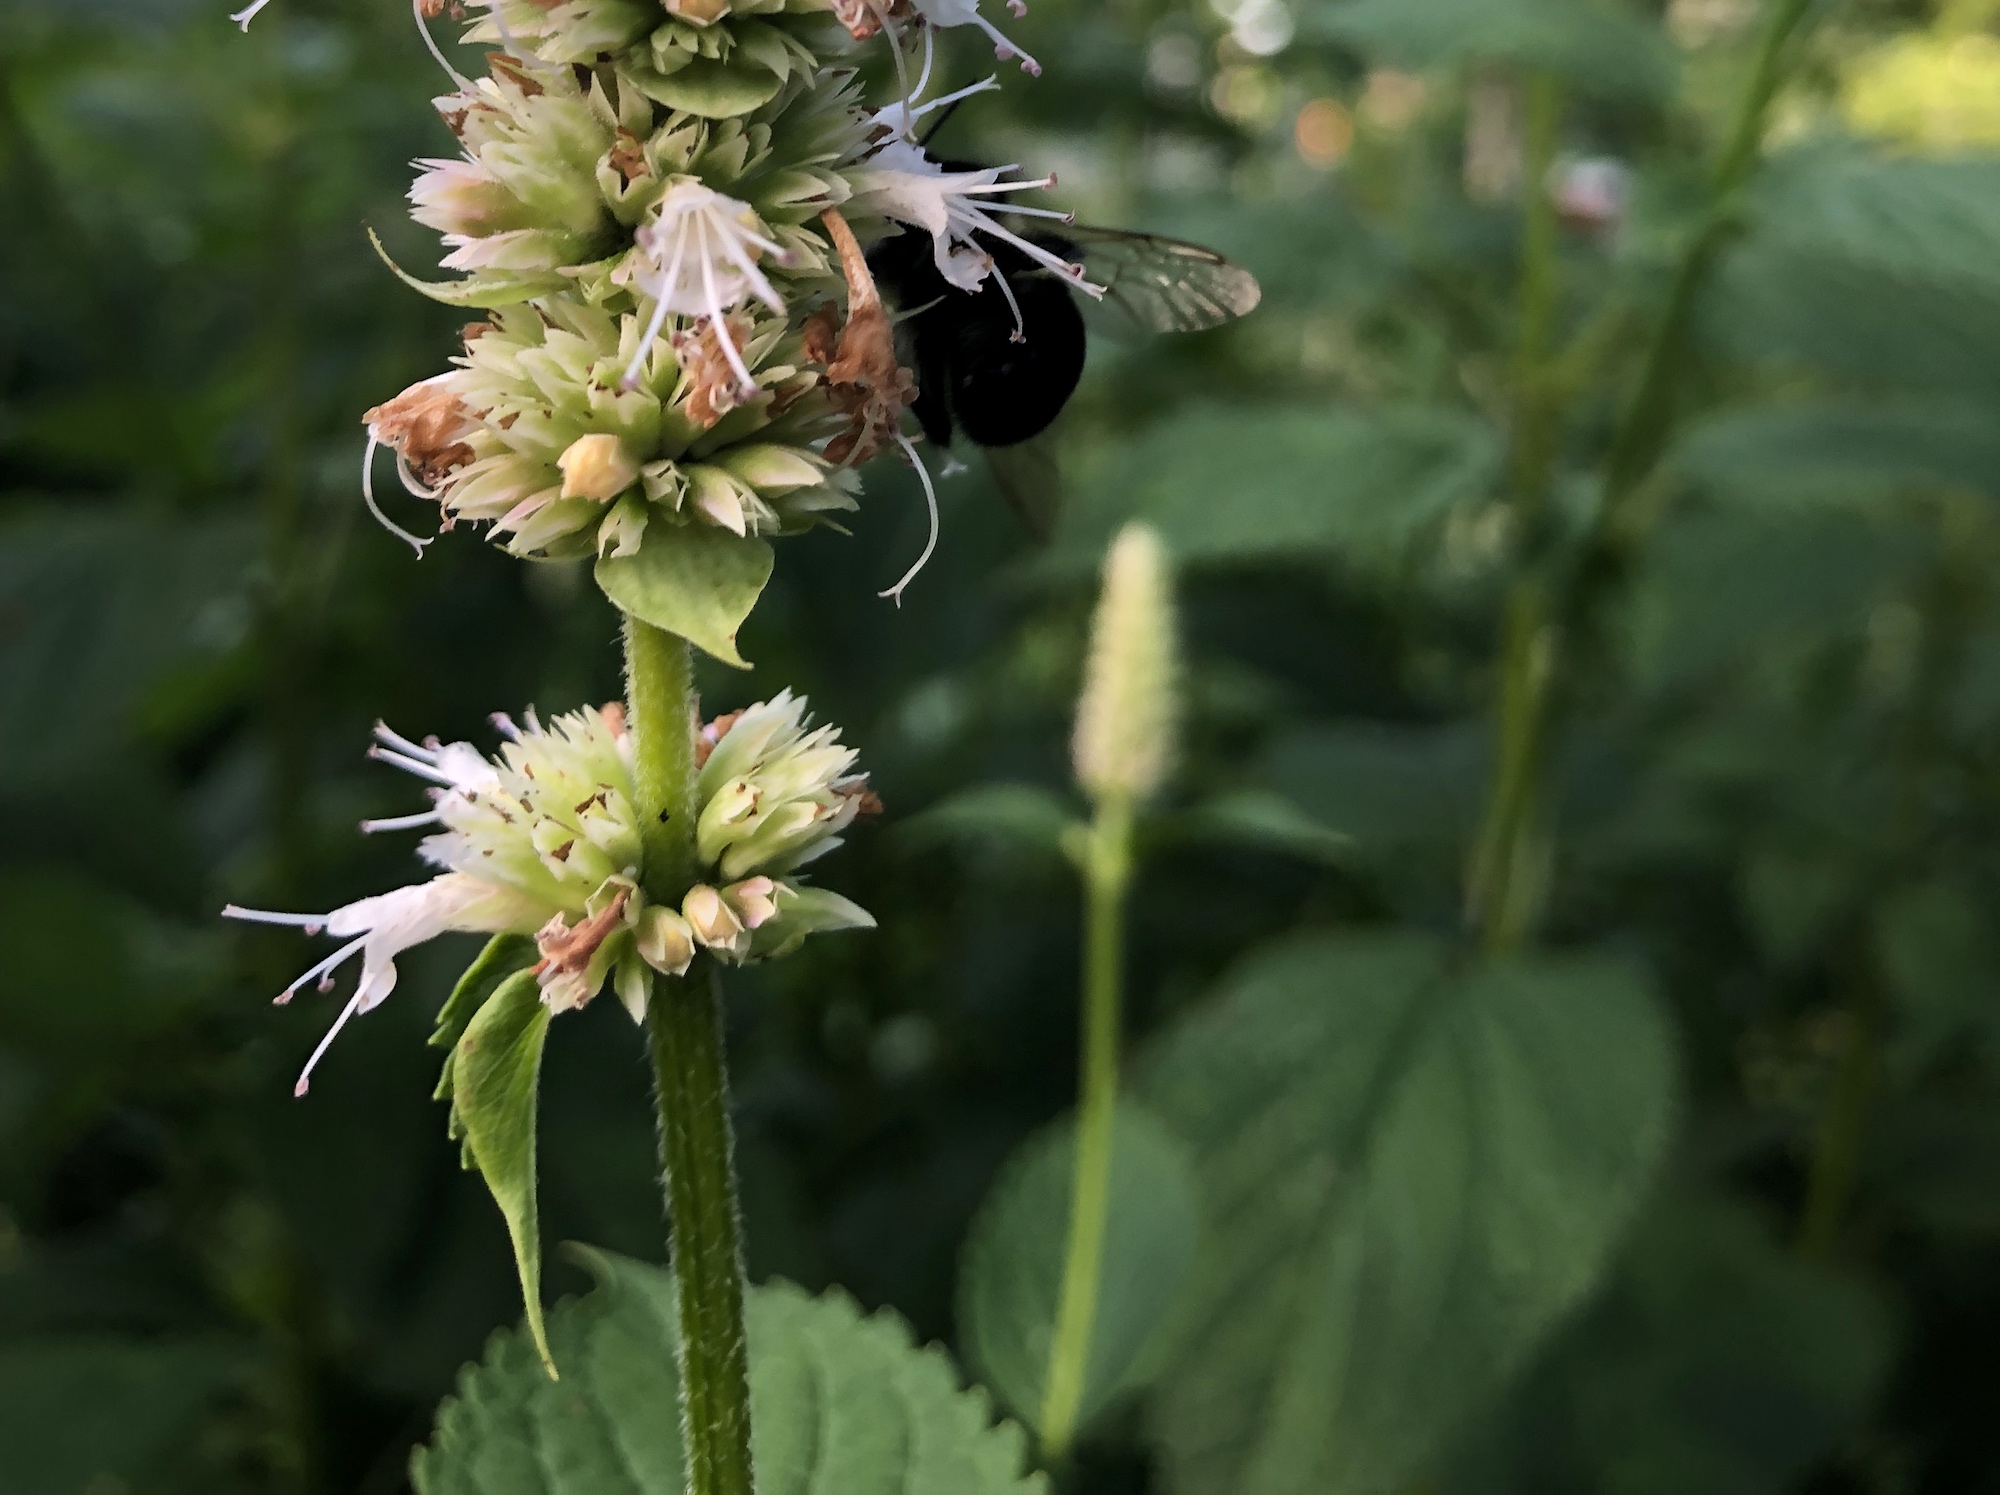 Bumblebee on Hyssop on August 3, 2019.